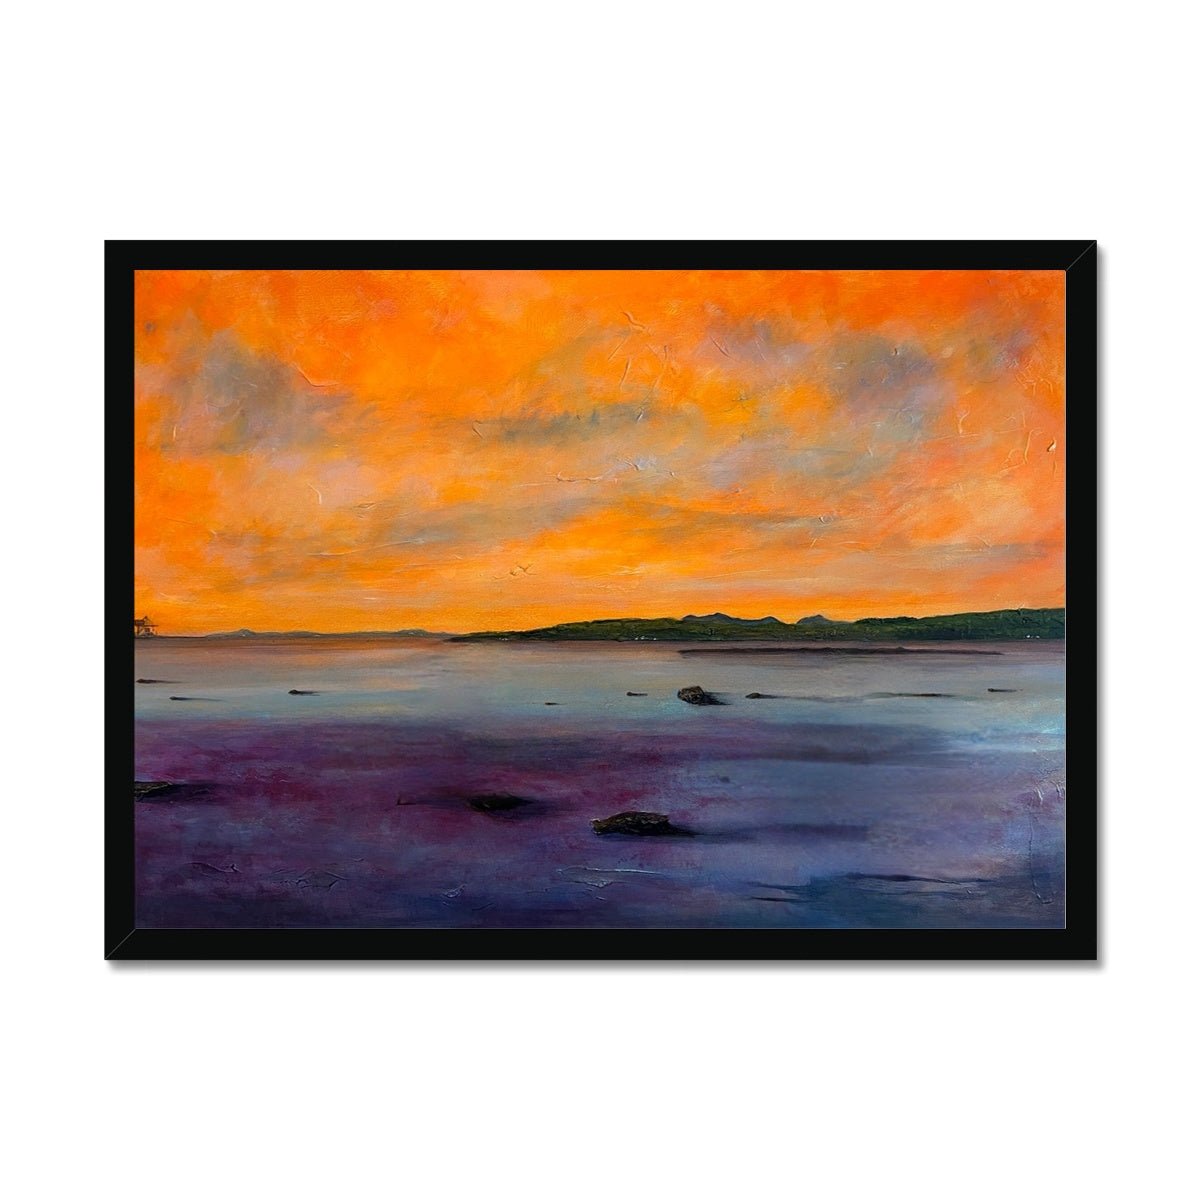 Looking From Largs Painting | Framed Prints From Scotland-Framed Prints-River Clyde Art Gallery-A2 Landscape-Black Frame-Paintings, Prints, Homeware, Art Gifts From Scotland By Scottish Artist Kevin Hunter